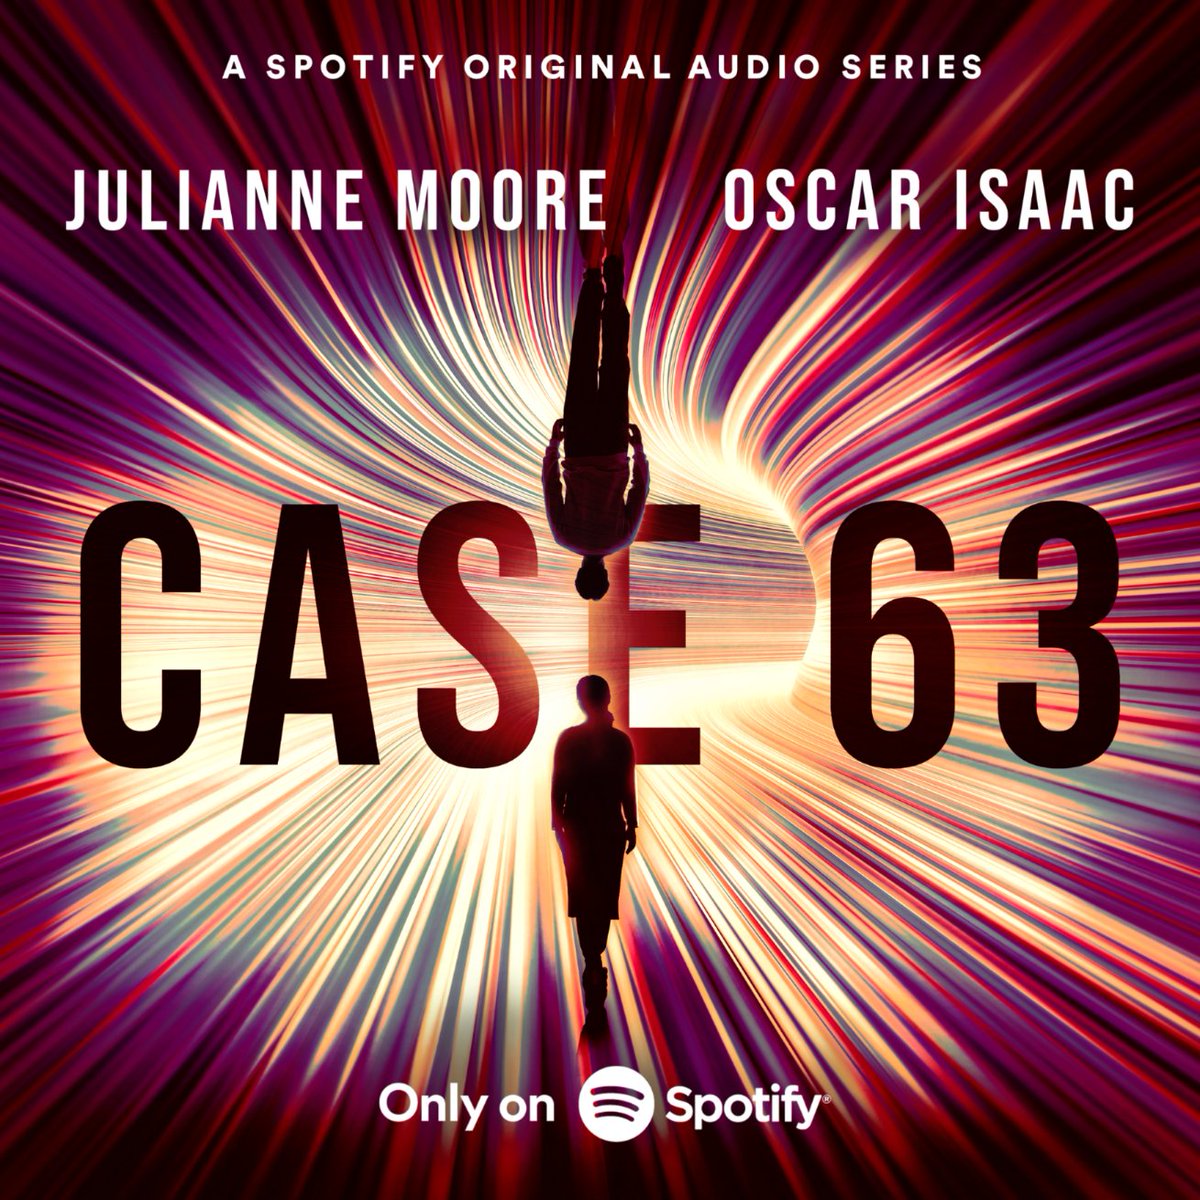 Believing is a matter of time. Emmy-Nominee Oscar Isaac and Academy-Award winner Julianne Moore star in Case 63 — a new audio series. Out tomorrow: spotify.link/case63